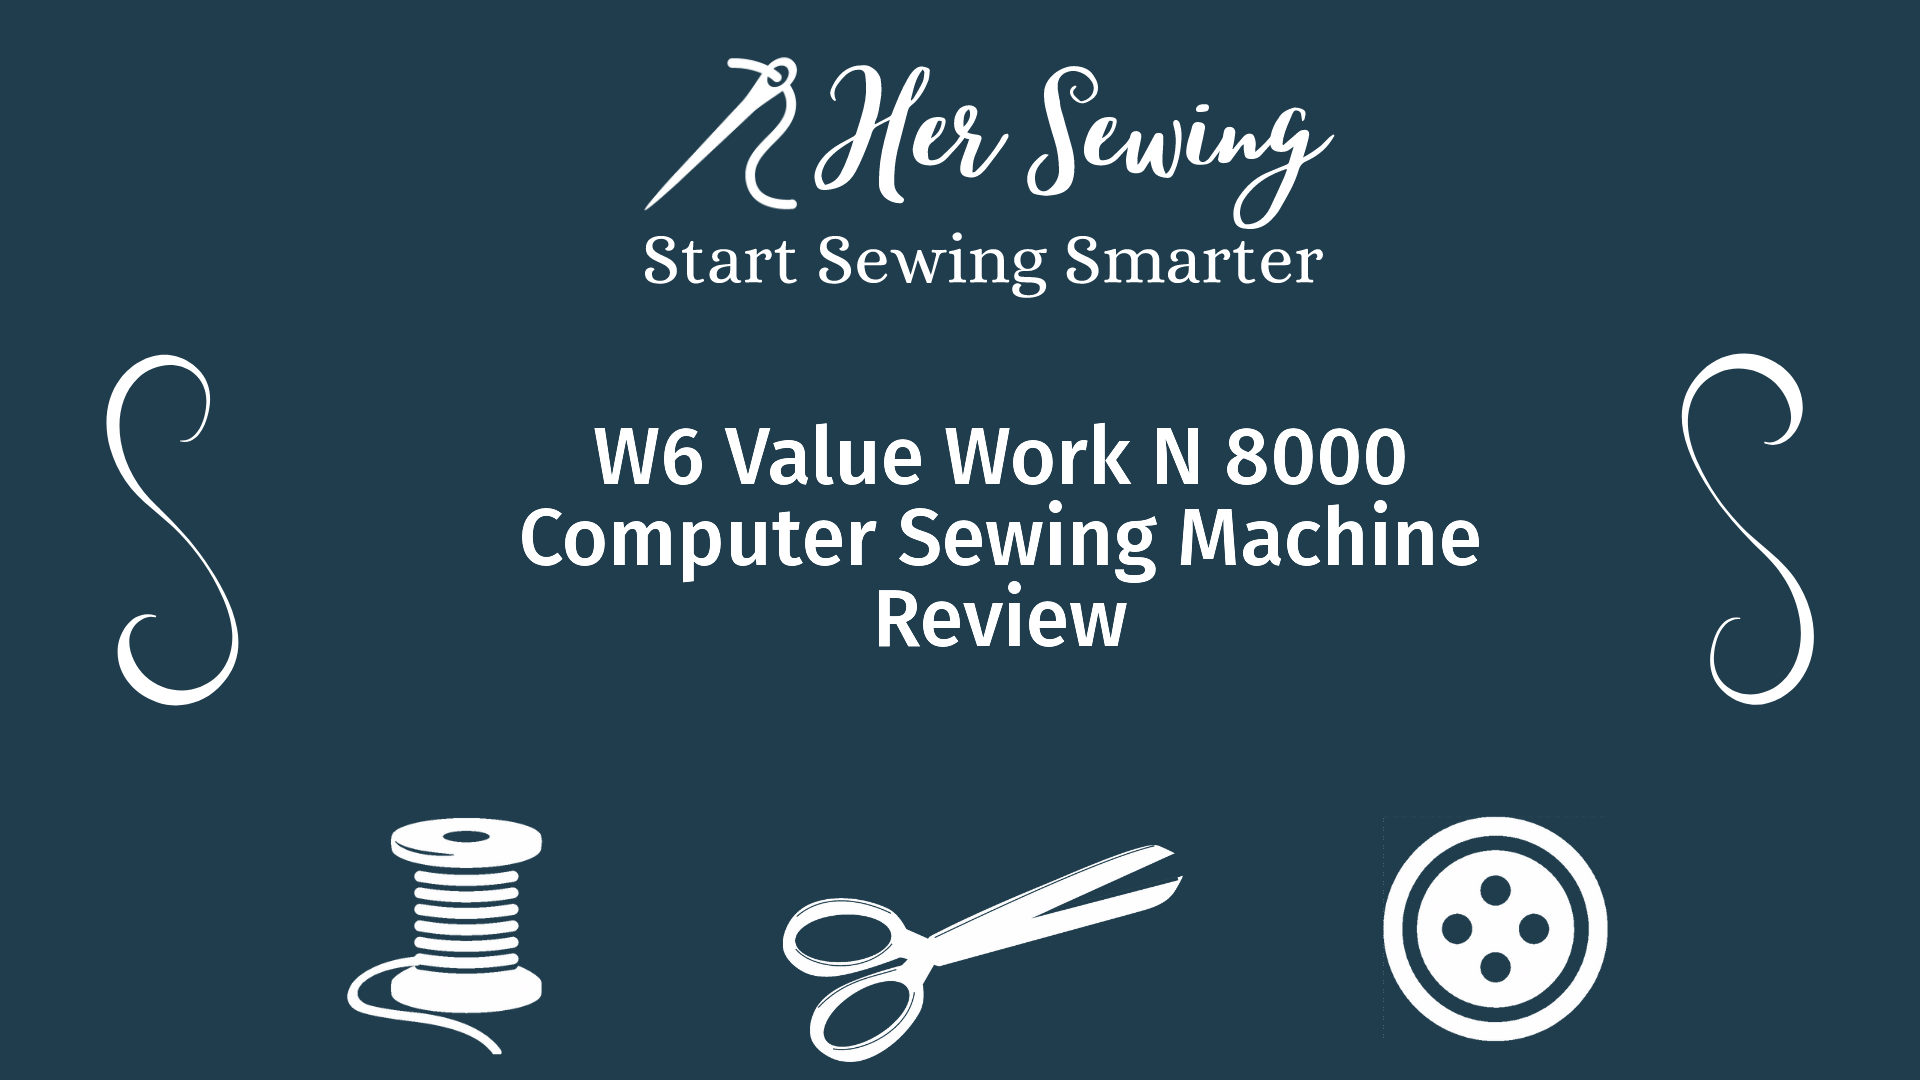 W6 Value Work N 8000 Computer Sewing Machine Review